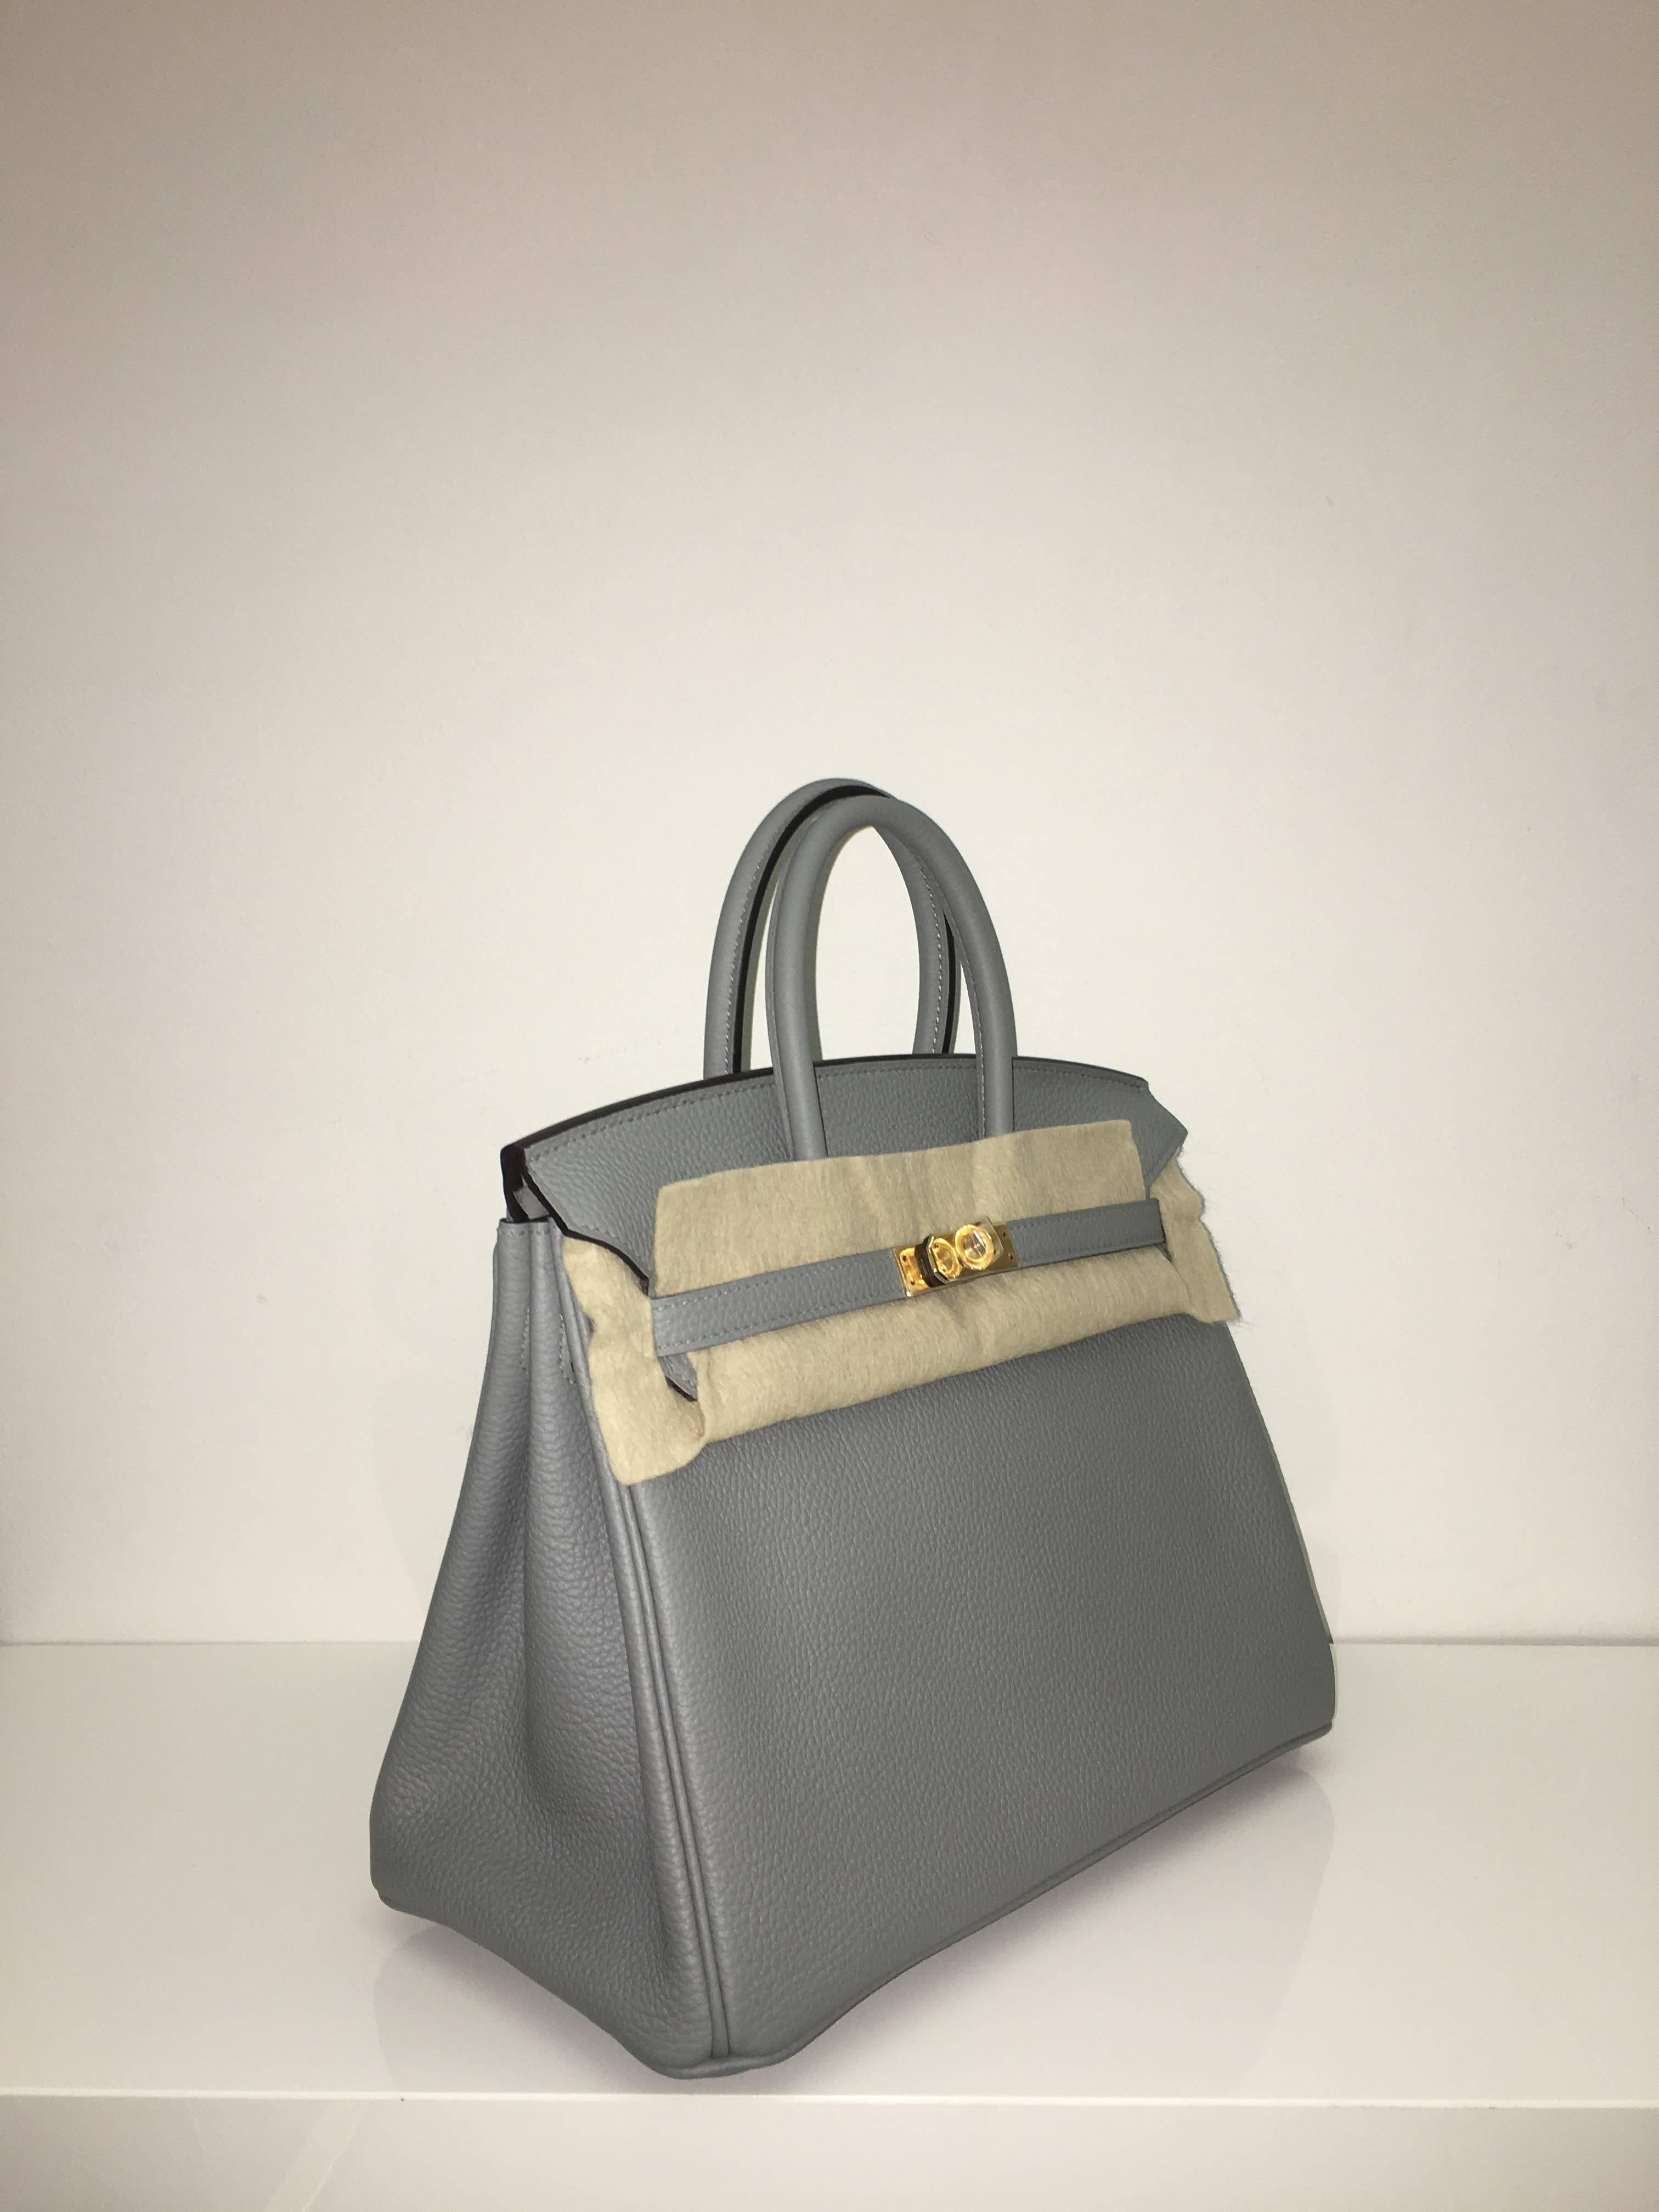 Hermes 
Birkin Size 25
Togo Leather 
Colour Gris Mouette
Gold Hardware 
store fresh, comes with receipt and full set (dust bag, box...) 
Hydeparkfashion specializes in sourcing and delivering authentic luxury handbags, mainly Hermes, to client